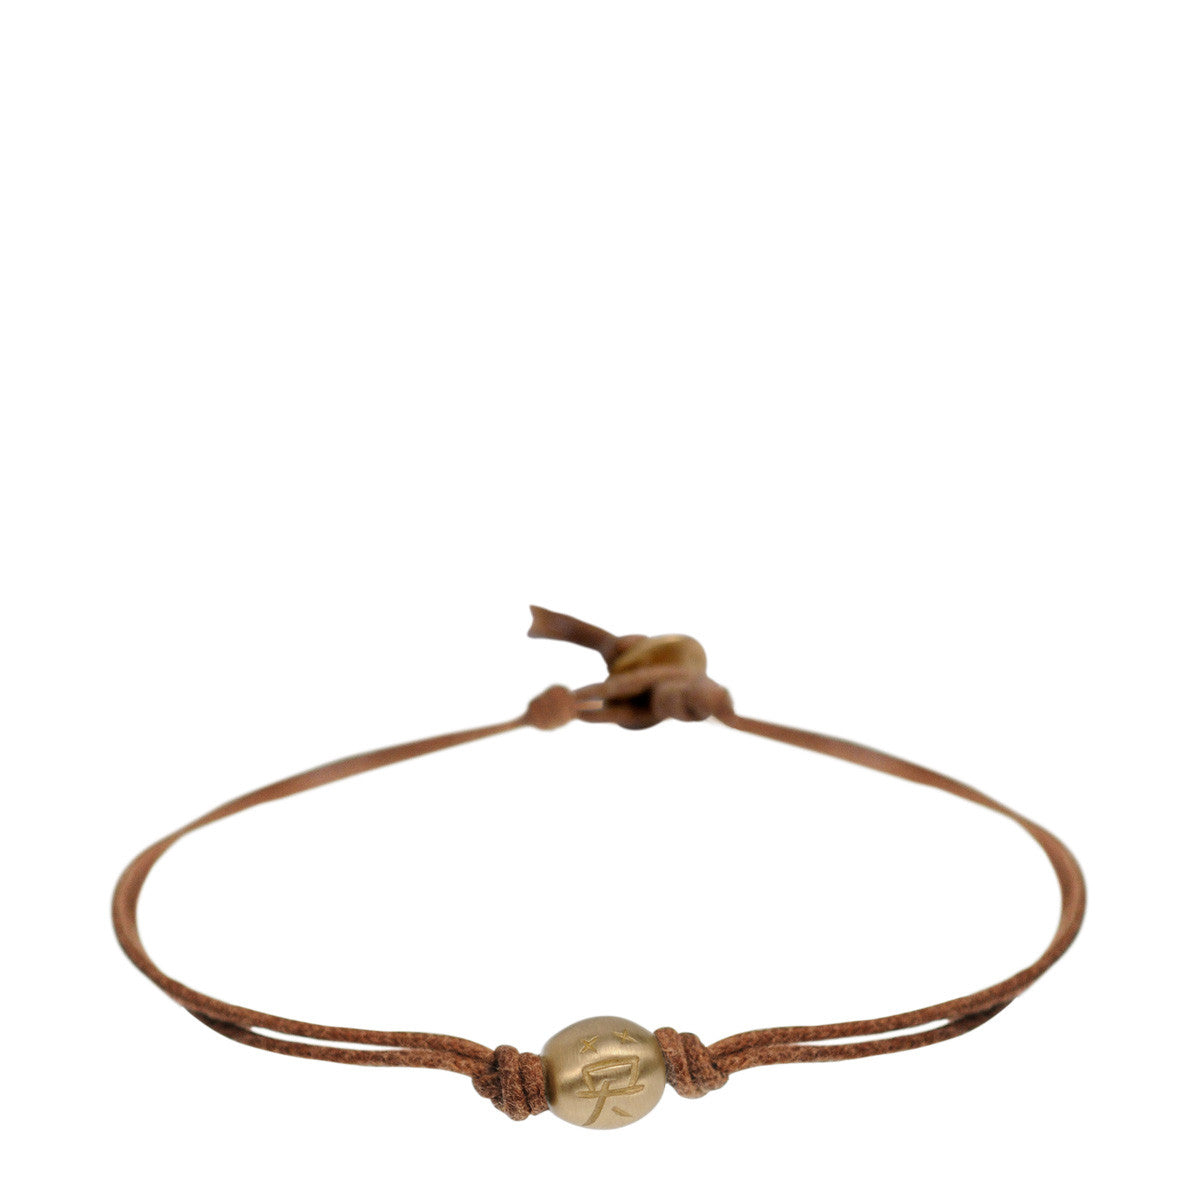 10K Gold Courage Bead Bracelet on Natural Cord